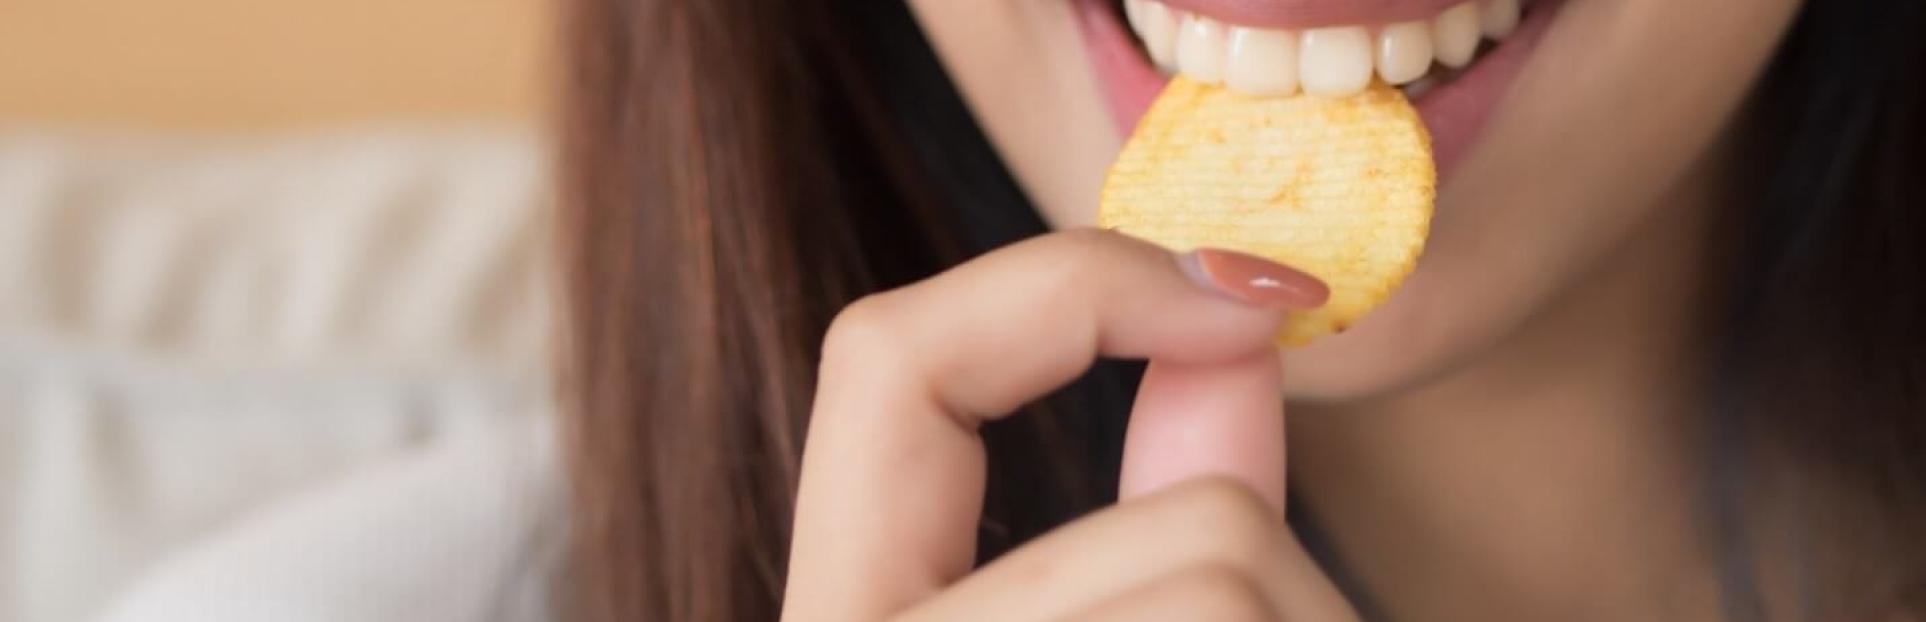 woman eating chip